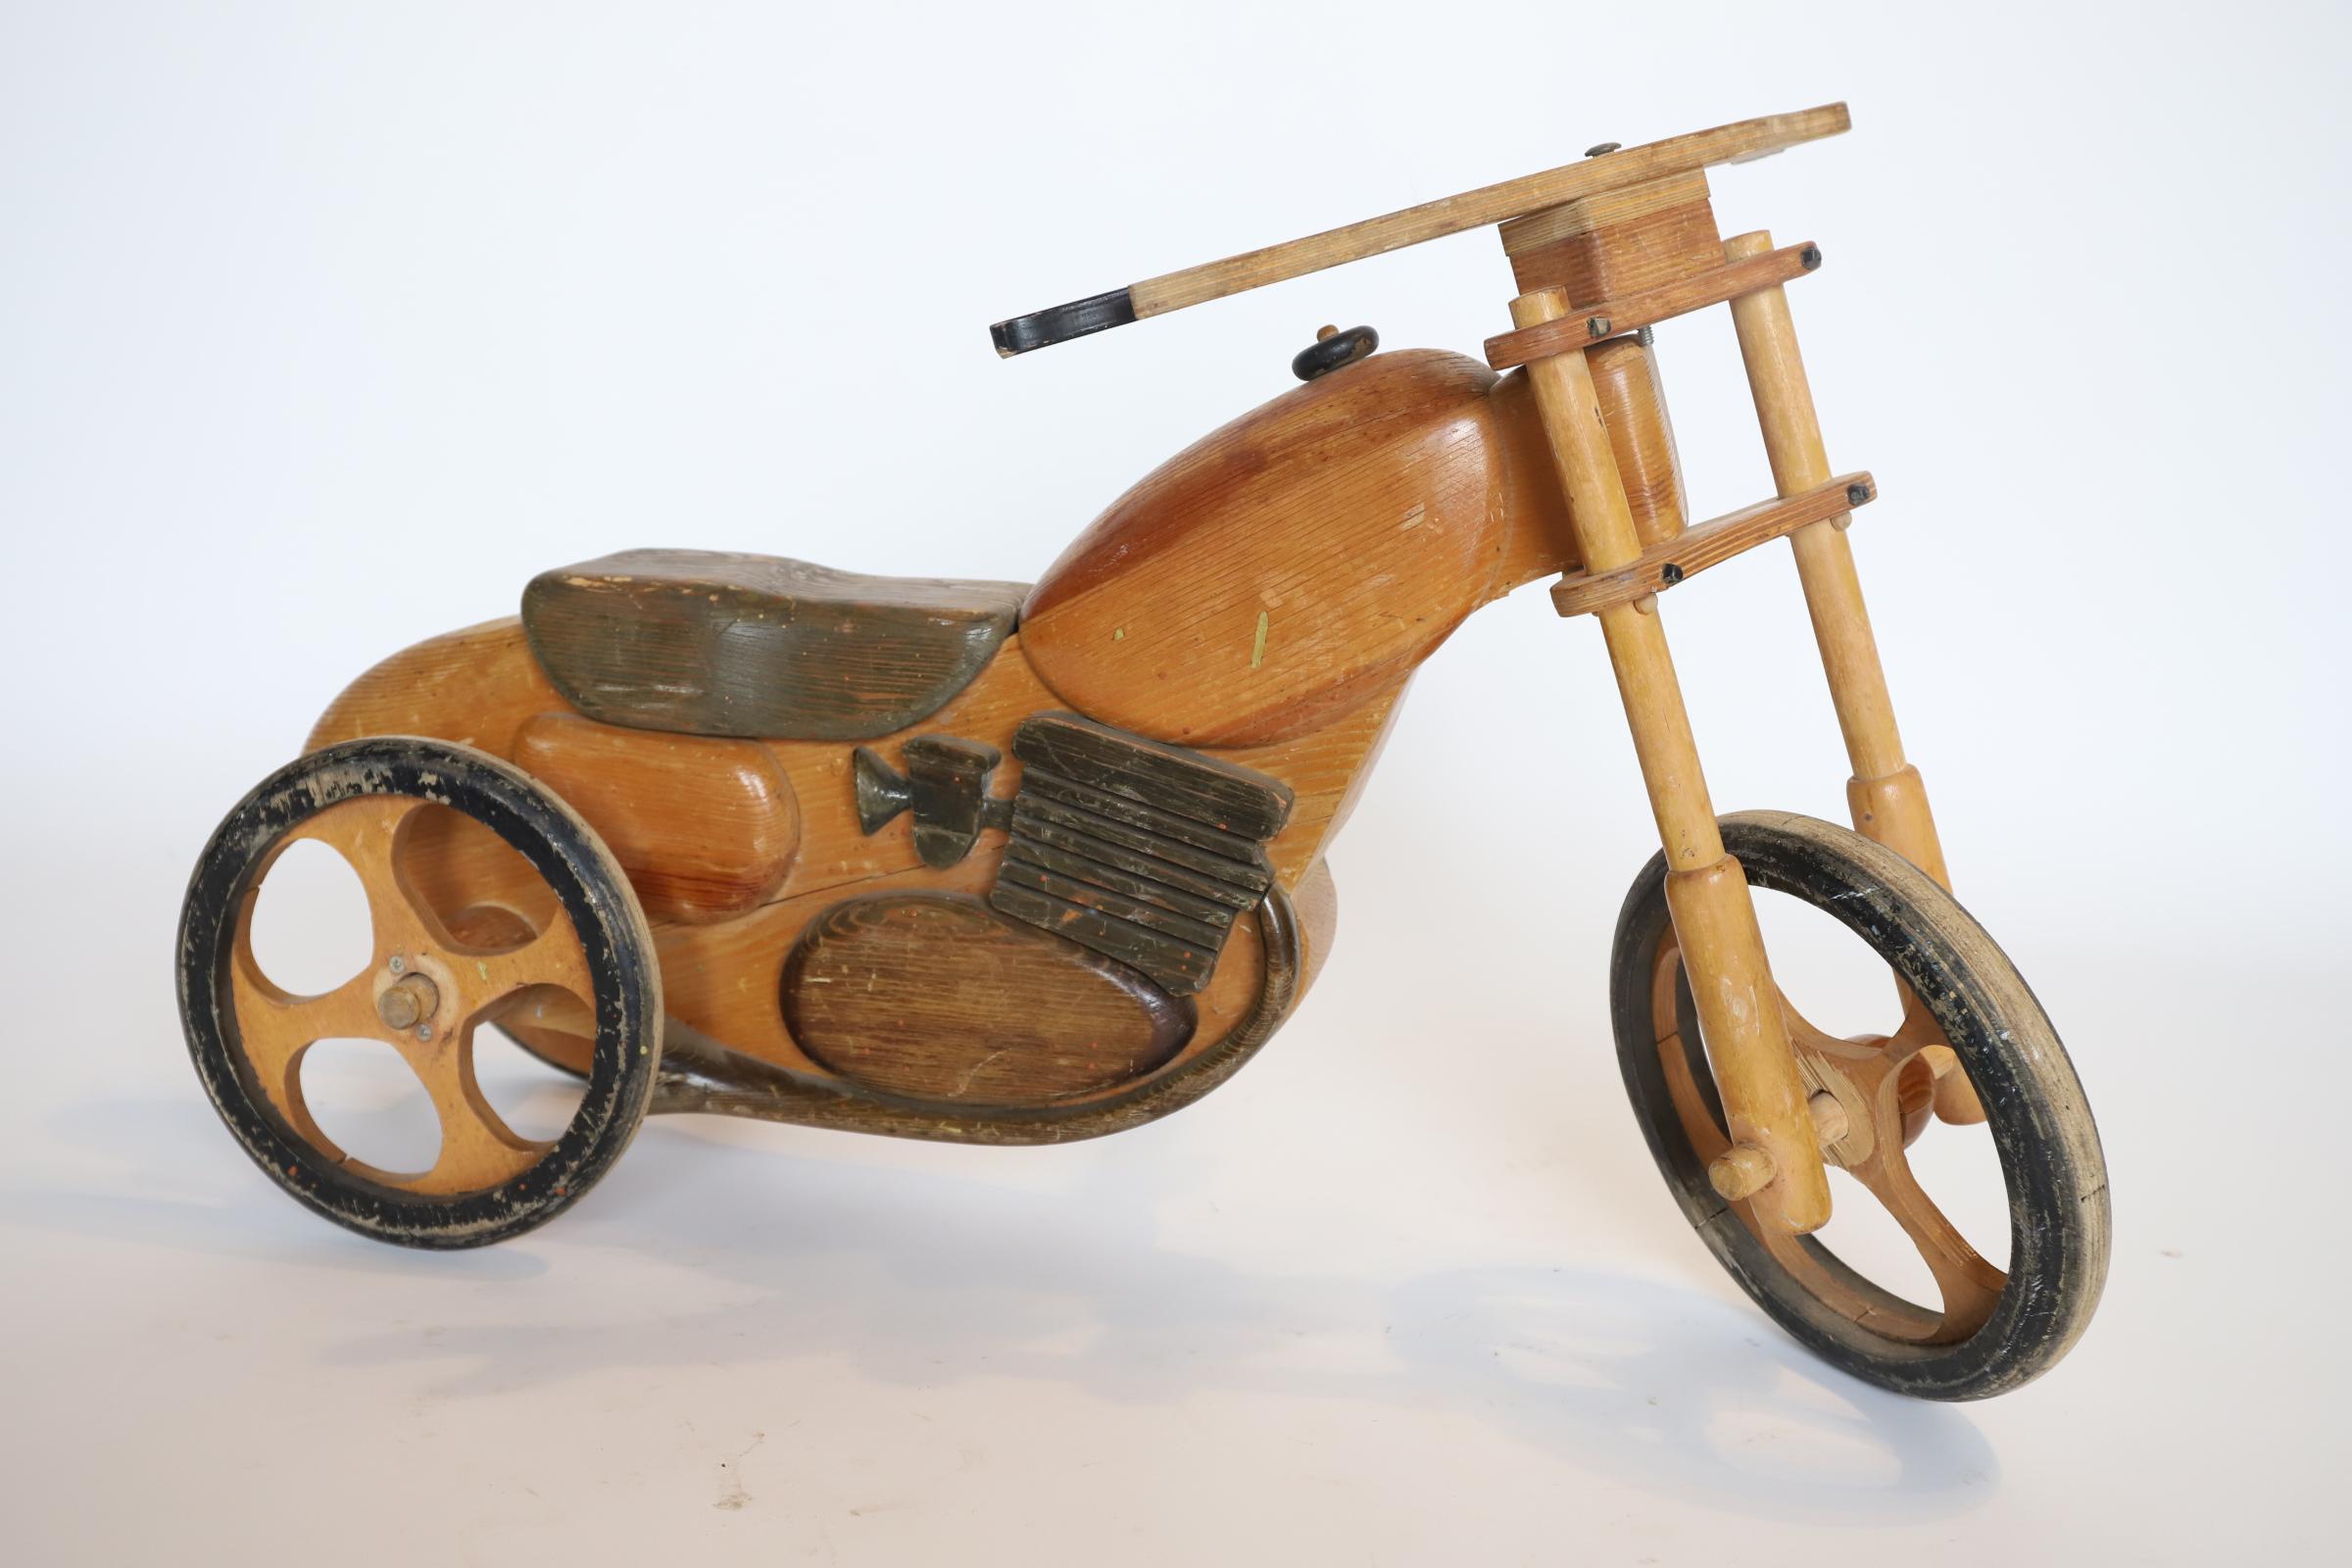 This tiny treasure has been road hard and put up wet! Wood carved child’s motorcycle - circa 1970s. Painted details are perfectly patinaed. Functionality of the ride, not so much - piece is best served as fun decor versus a child’s toy. Photographed